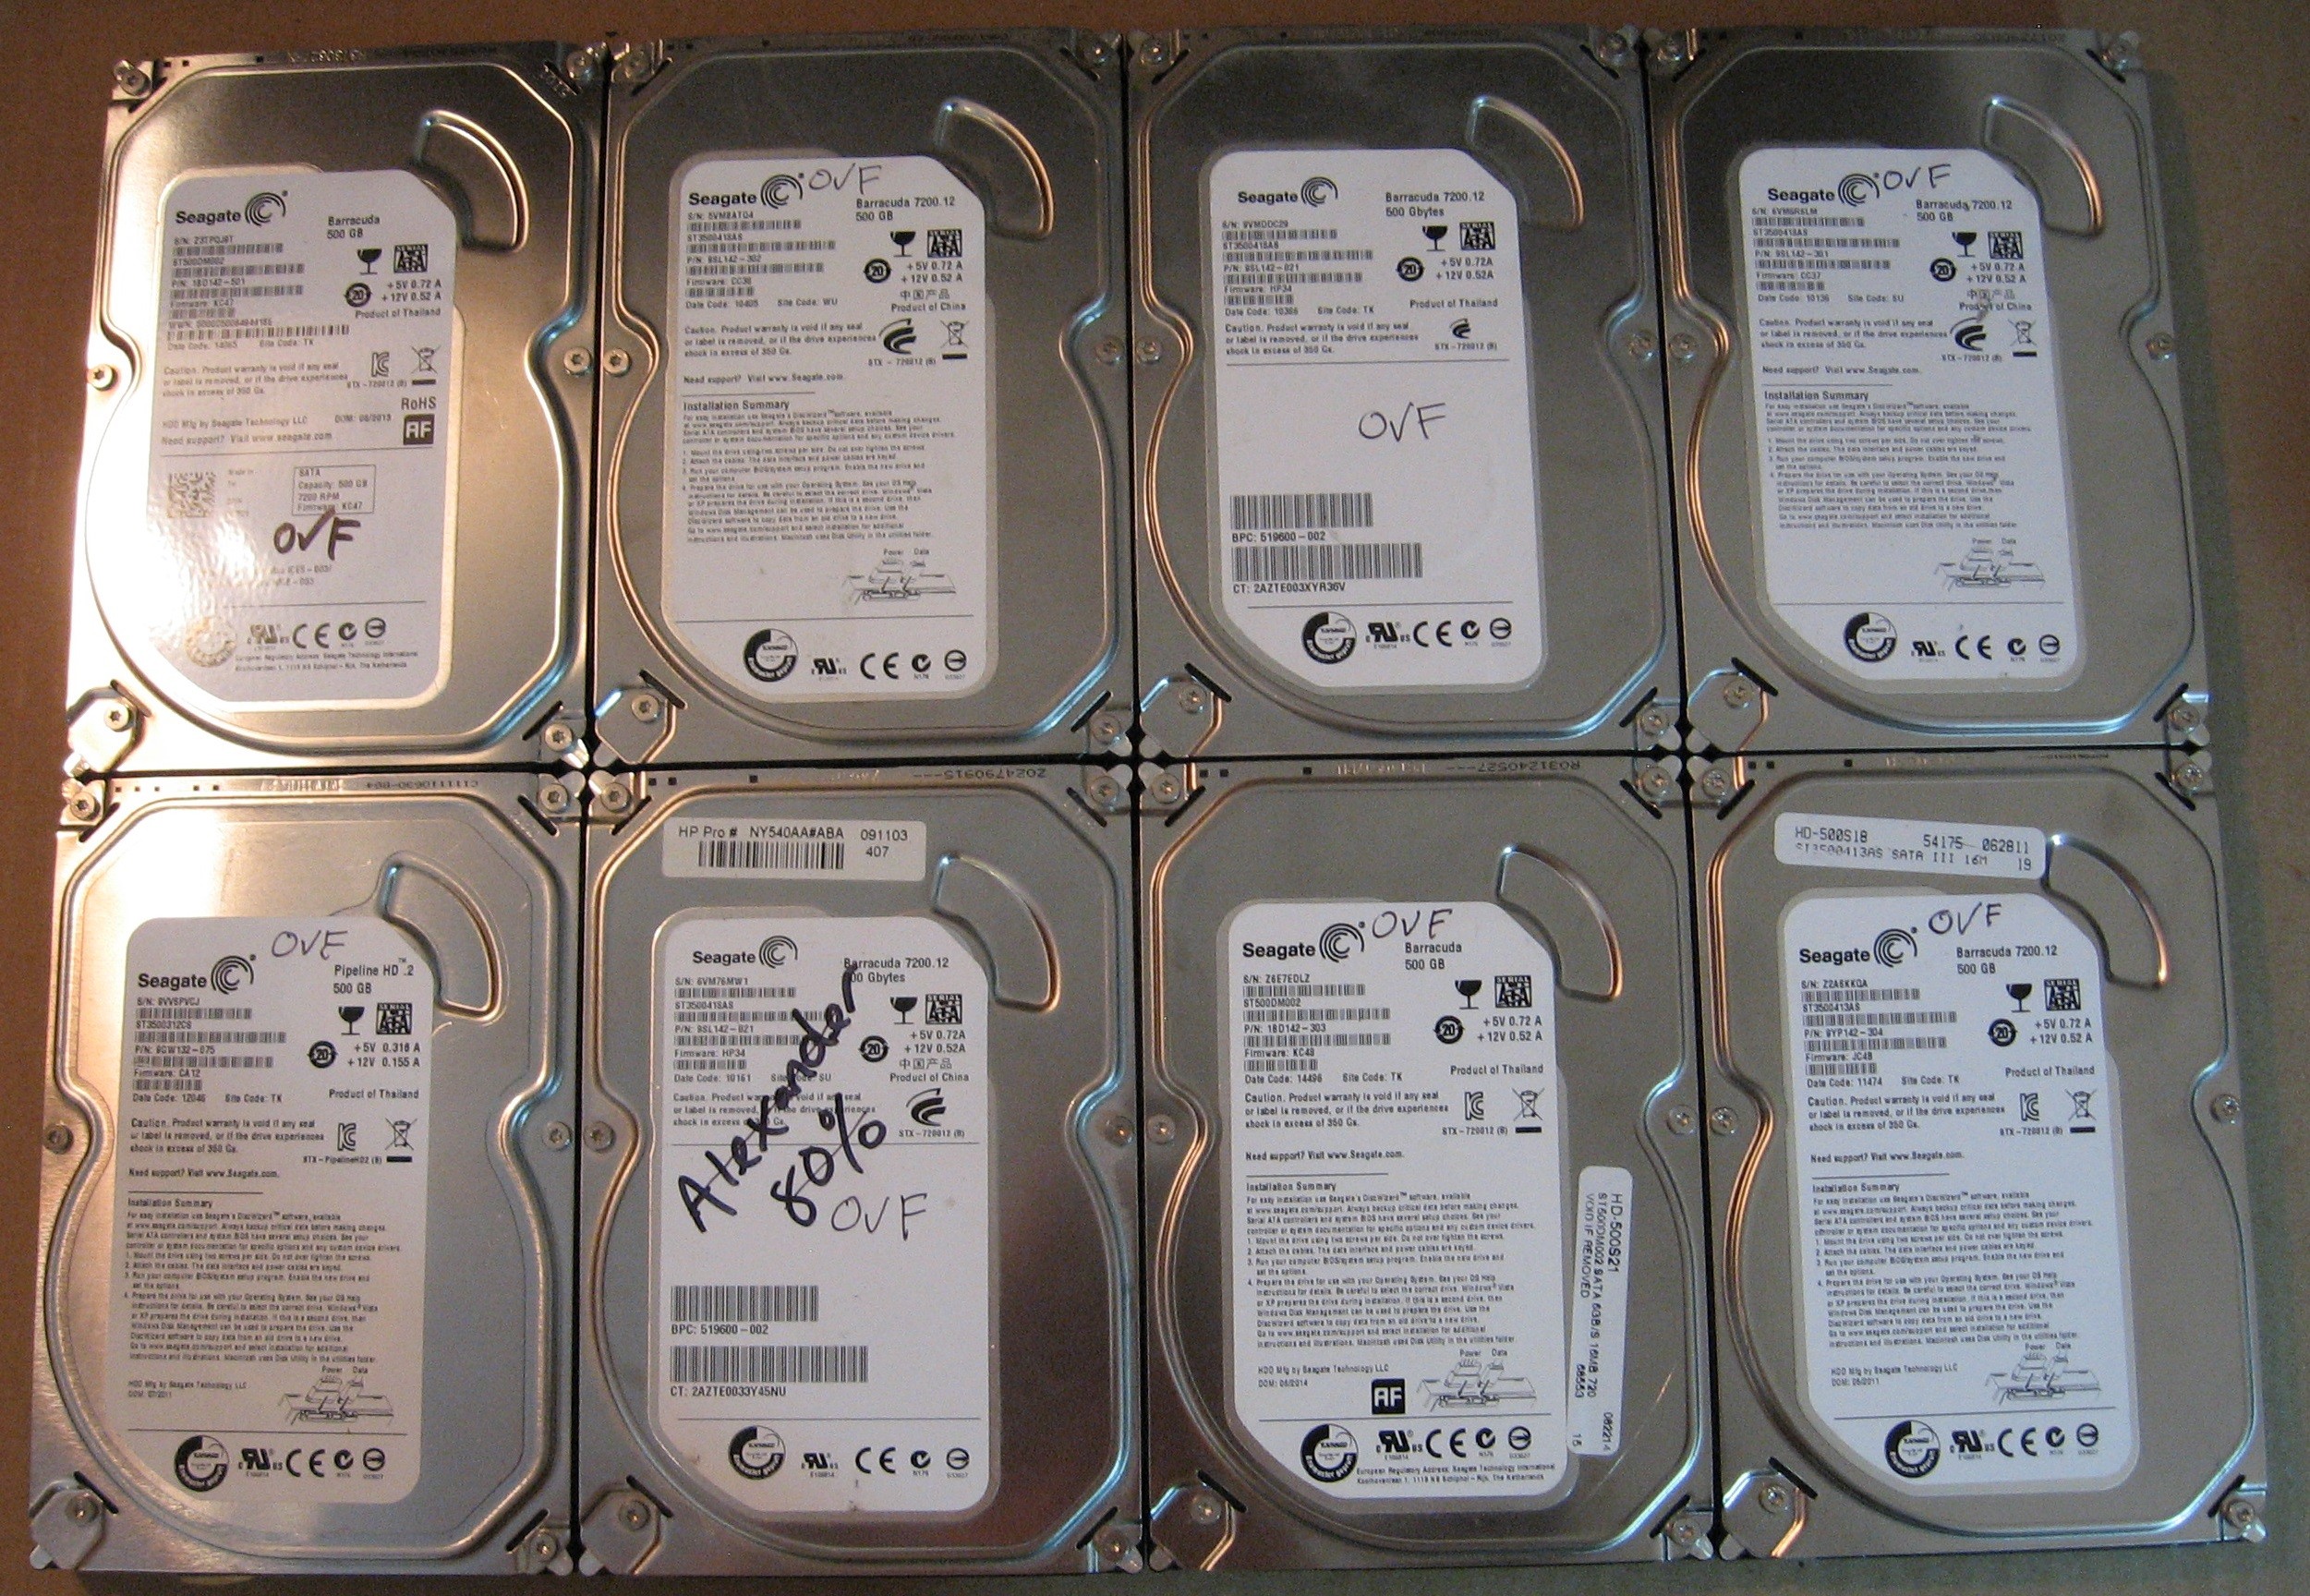 500GB HDD Lot of 8 Seagate 0310